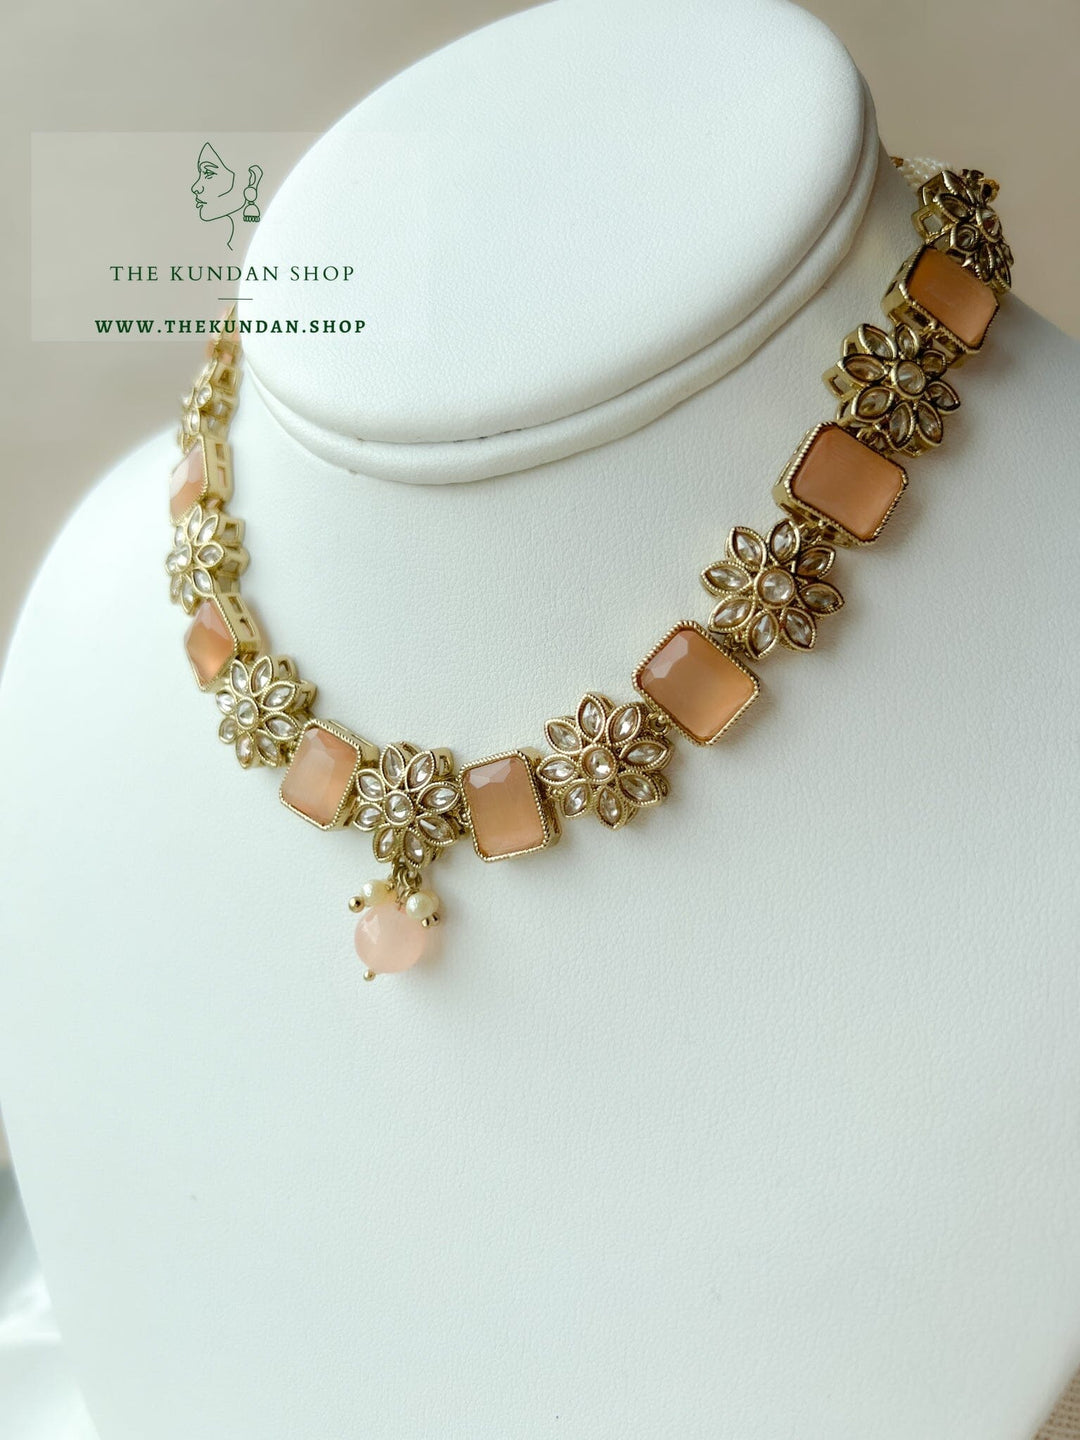 Private in Peach Necklace Sets THE KUNDAN SHOP 